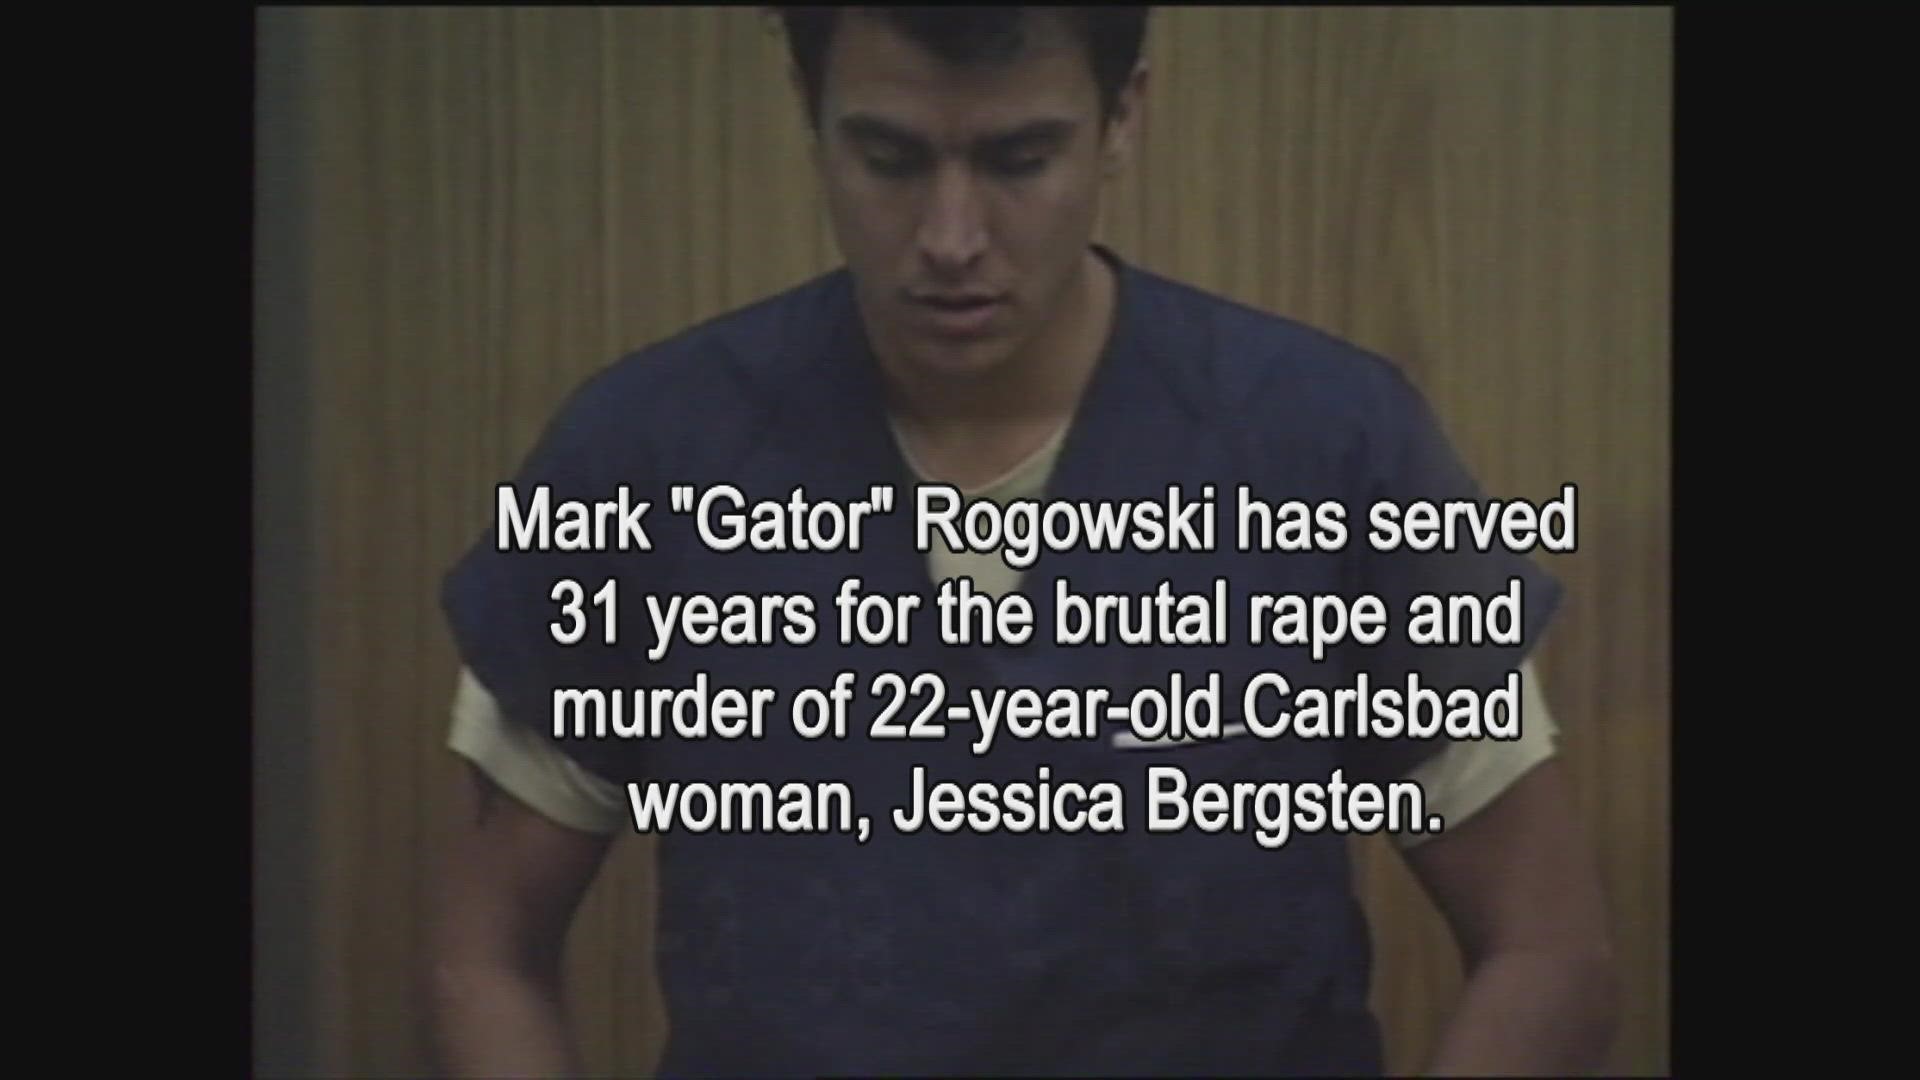 Rogowski was paroled in June of last year after serving 31 years for the rape and murder of a 22-year-old Carlsbad woman.